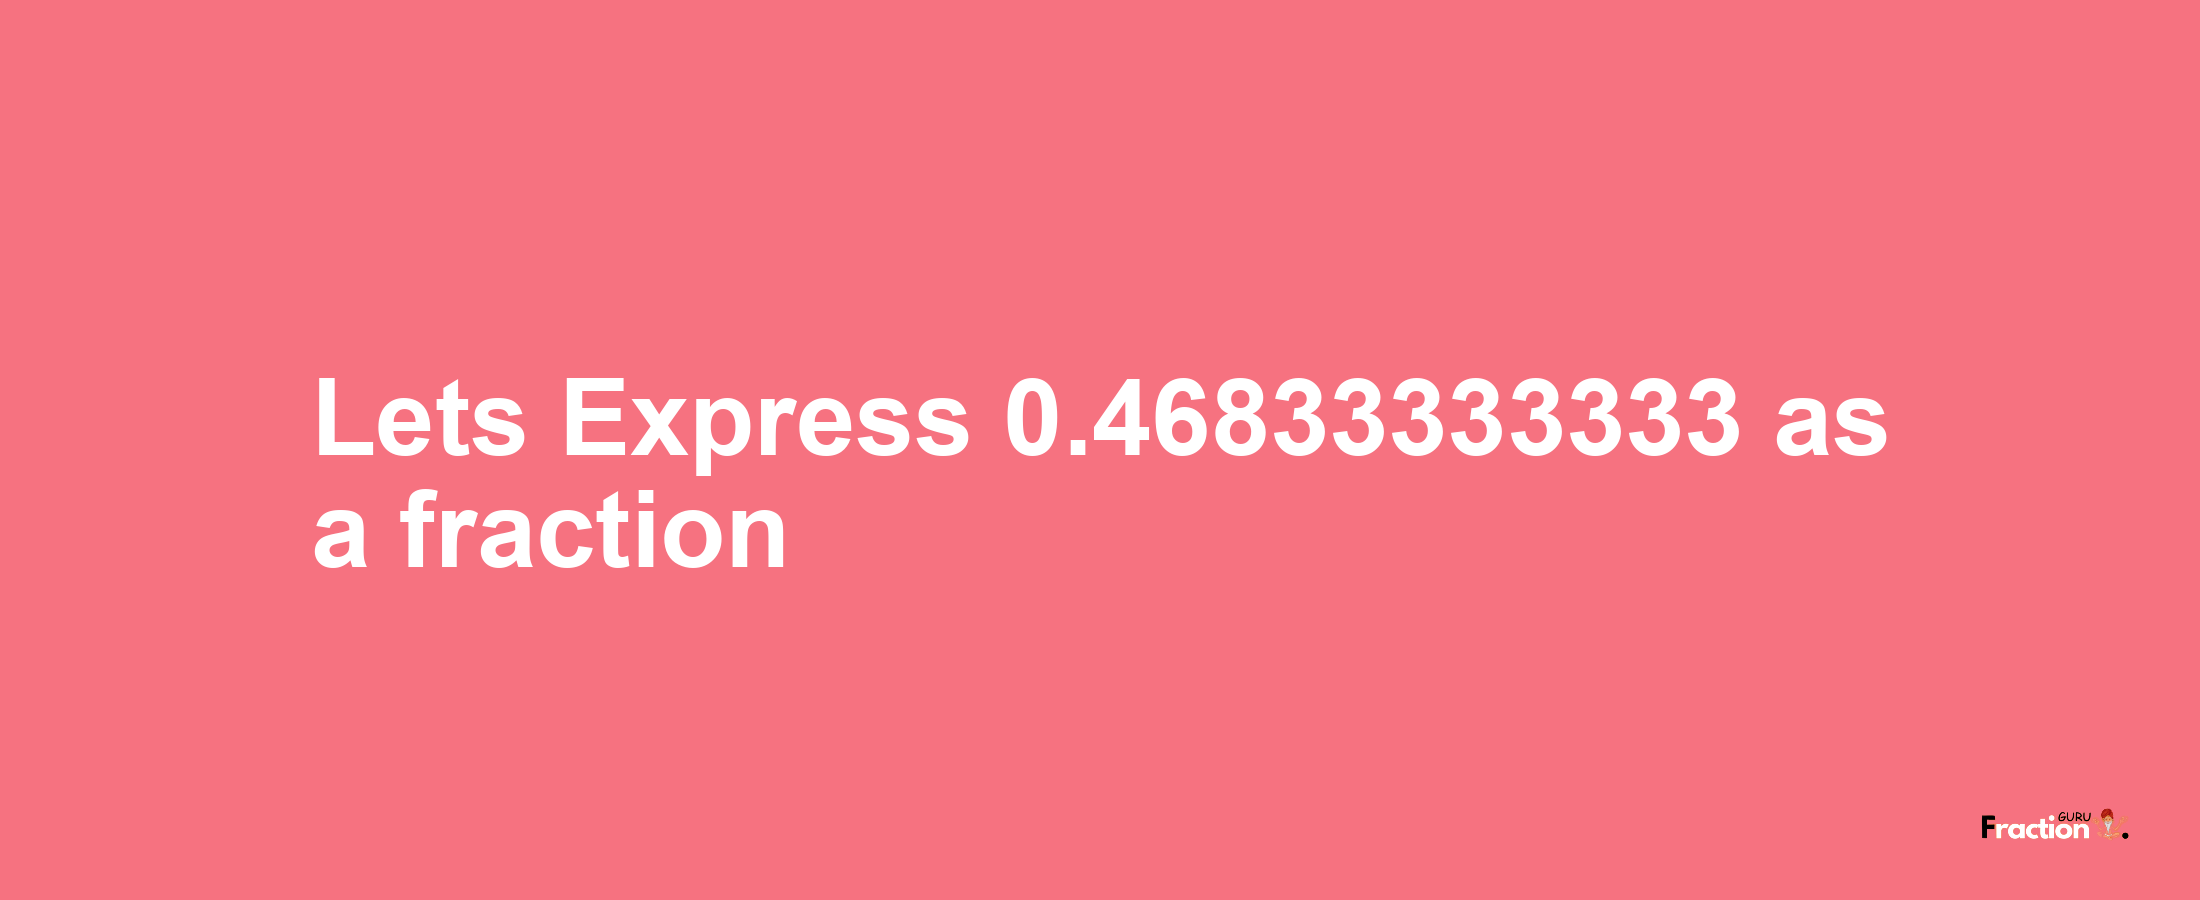 Lets Express 0.46833333333 as afraction